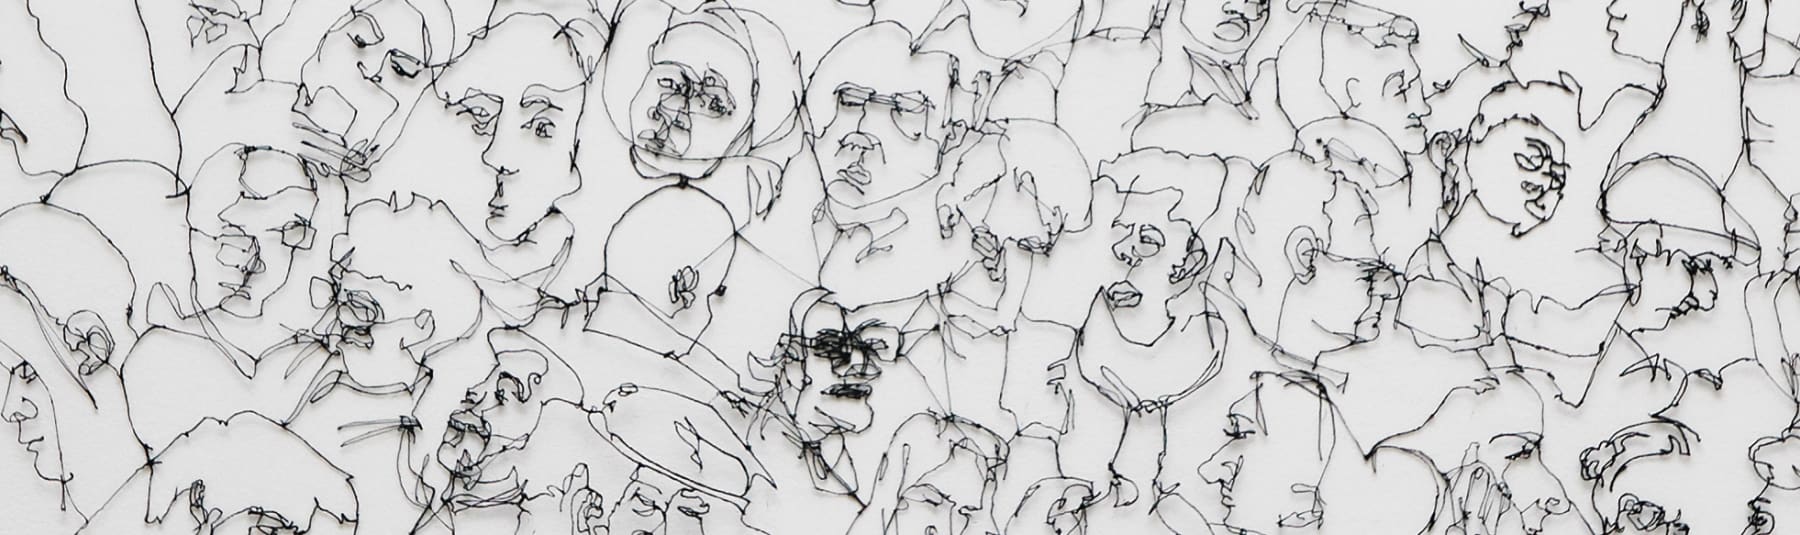 Drawing of people